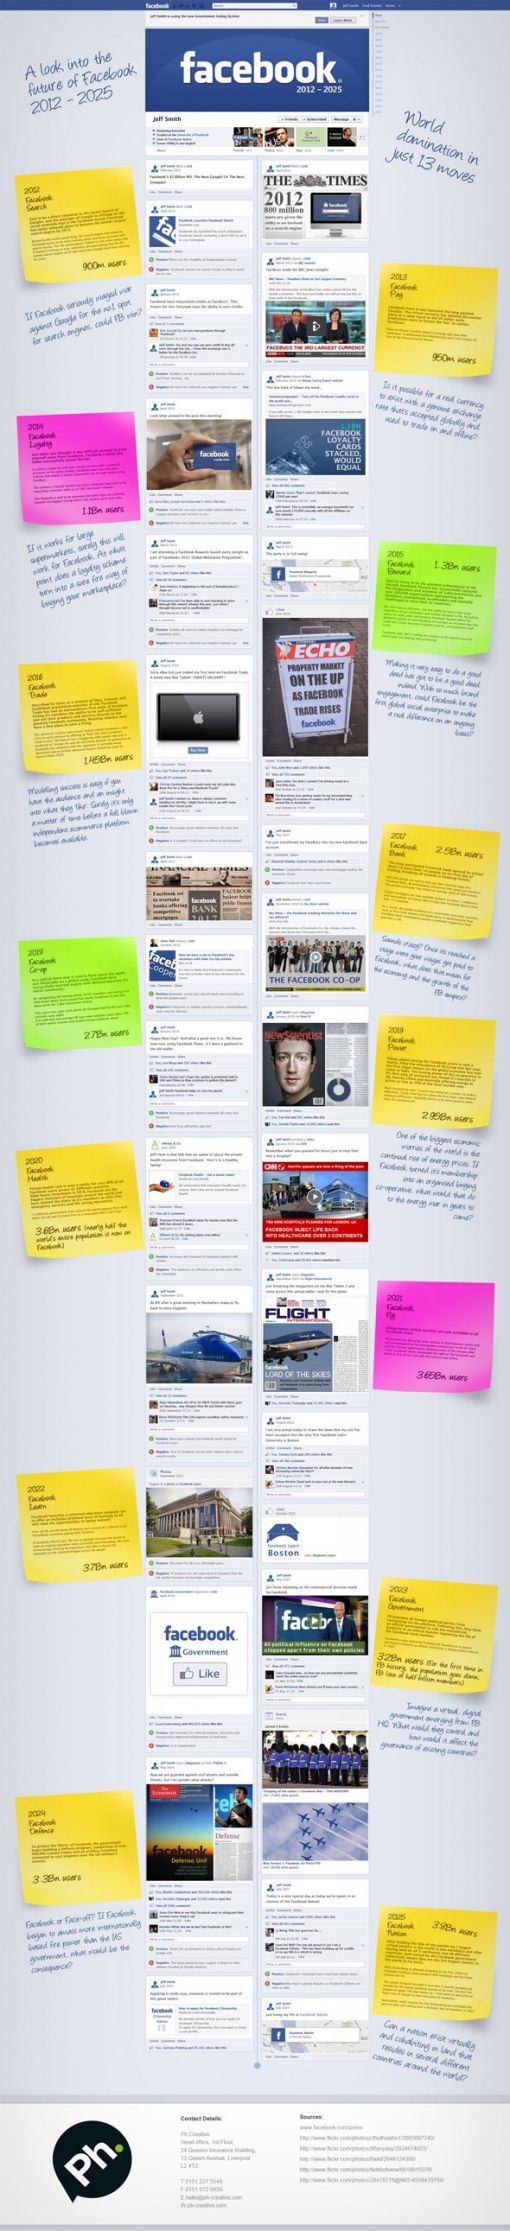 look-into-the-future-of-facebook.jpg